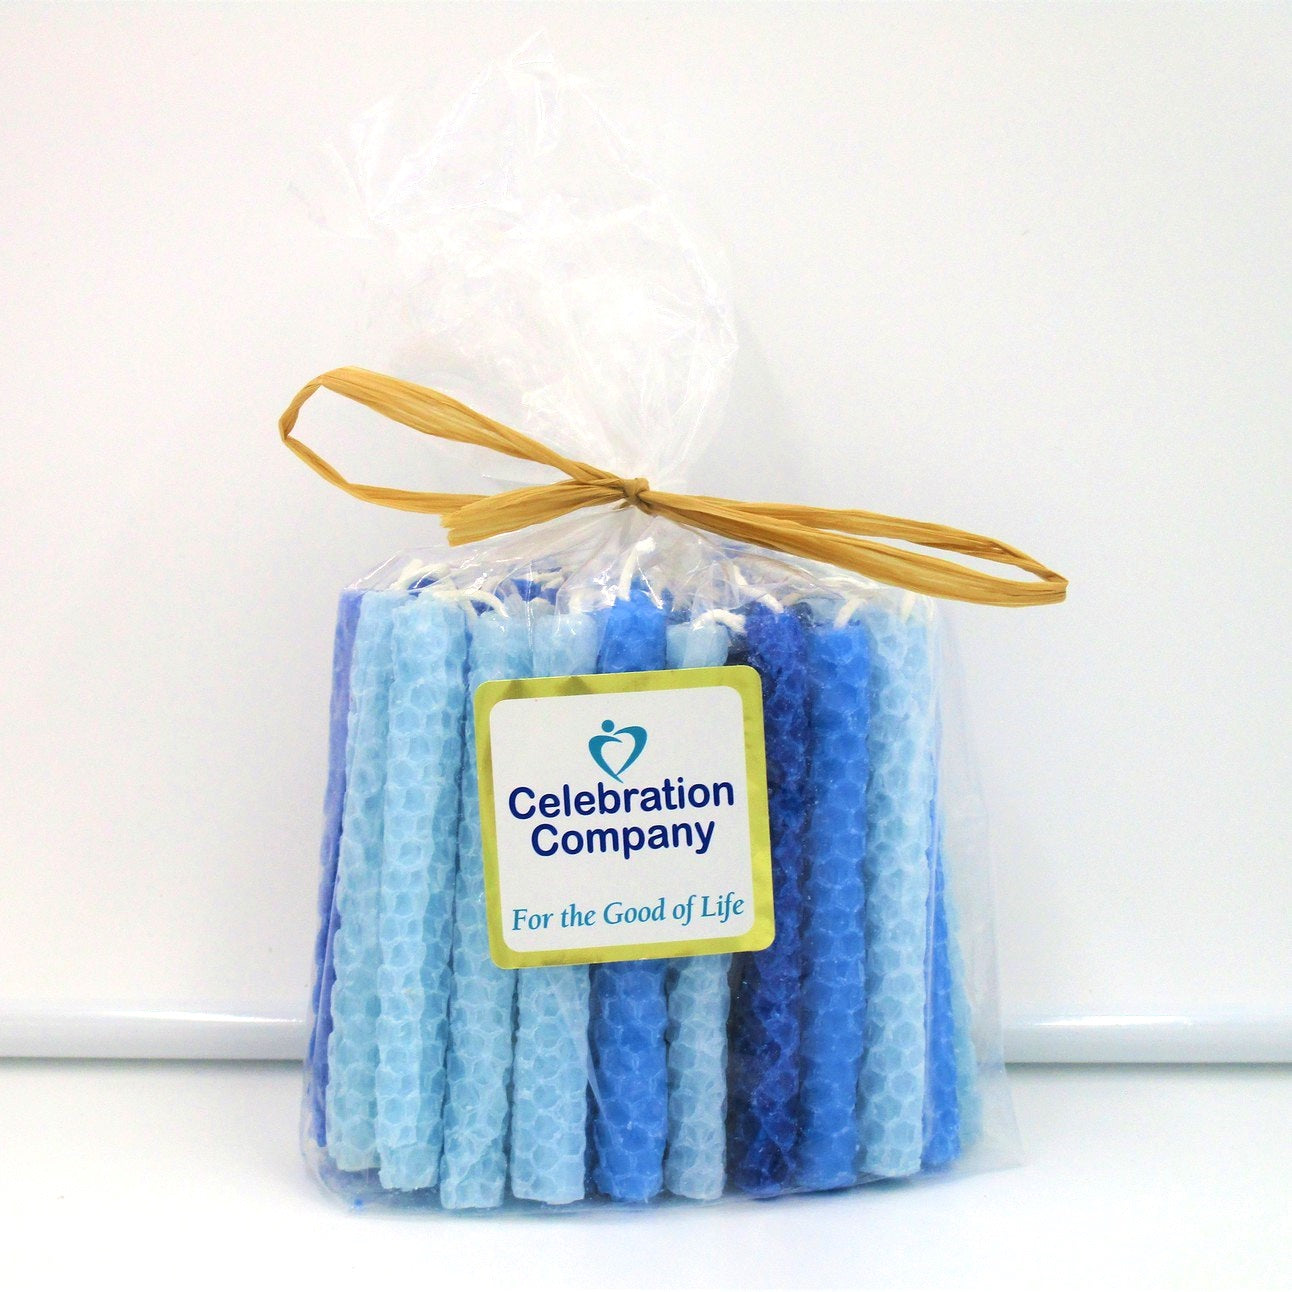 Packaged hand rolled beeswax Chanukah candles with various blue colors